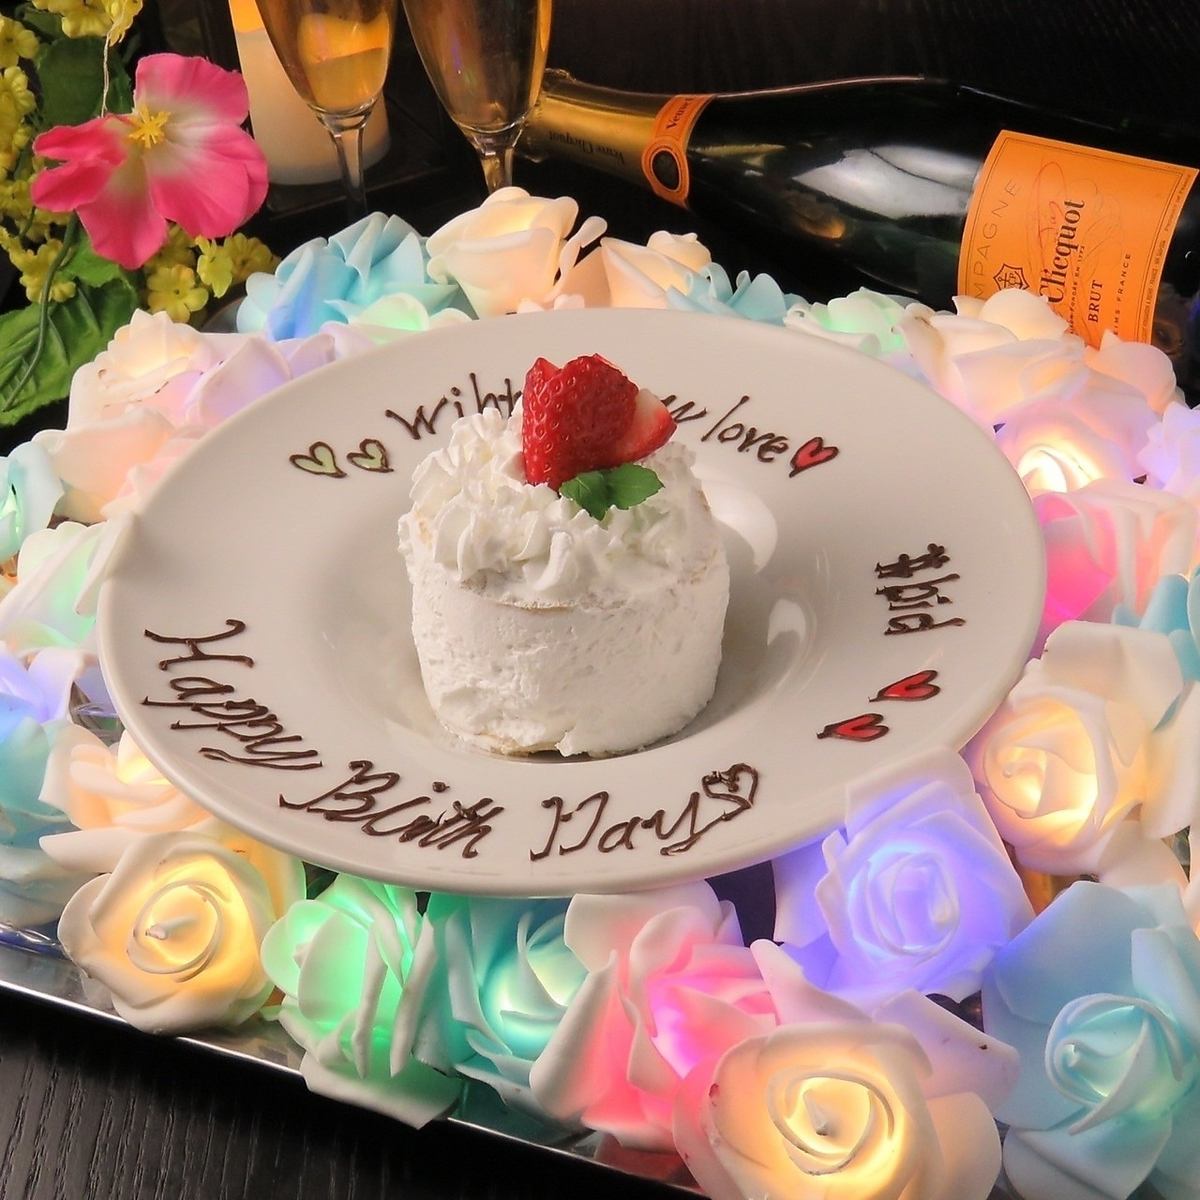 A moving birthday with bid. ★ Message hall cakes are also available ♪